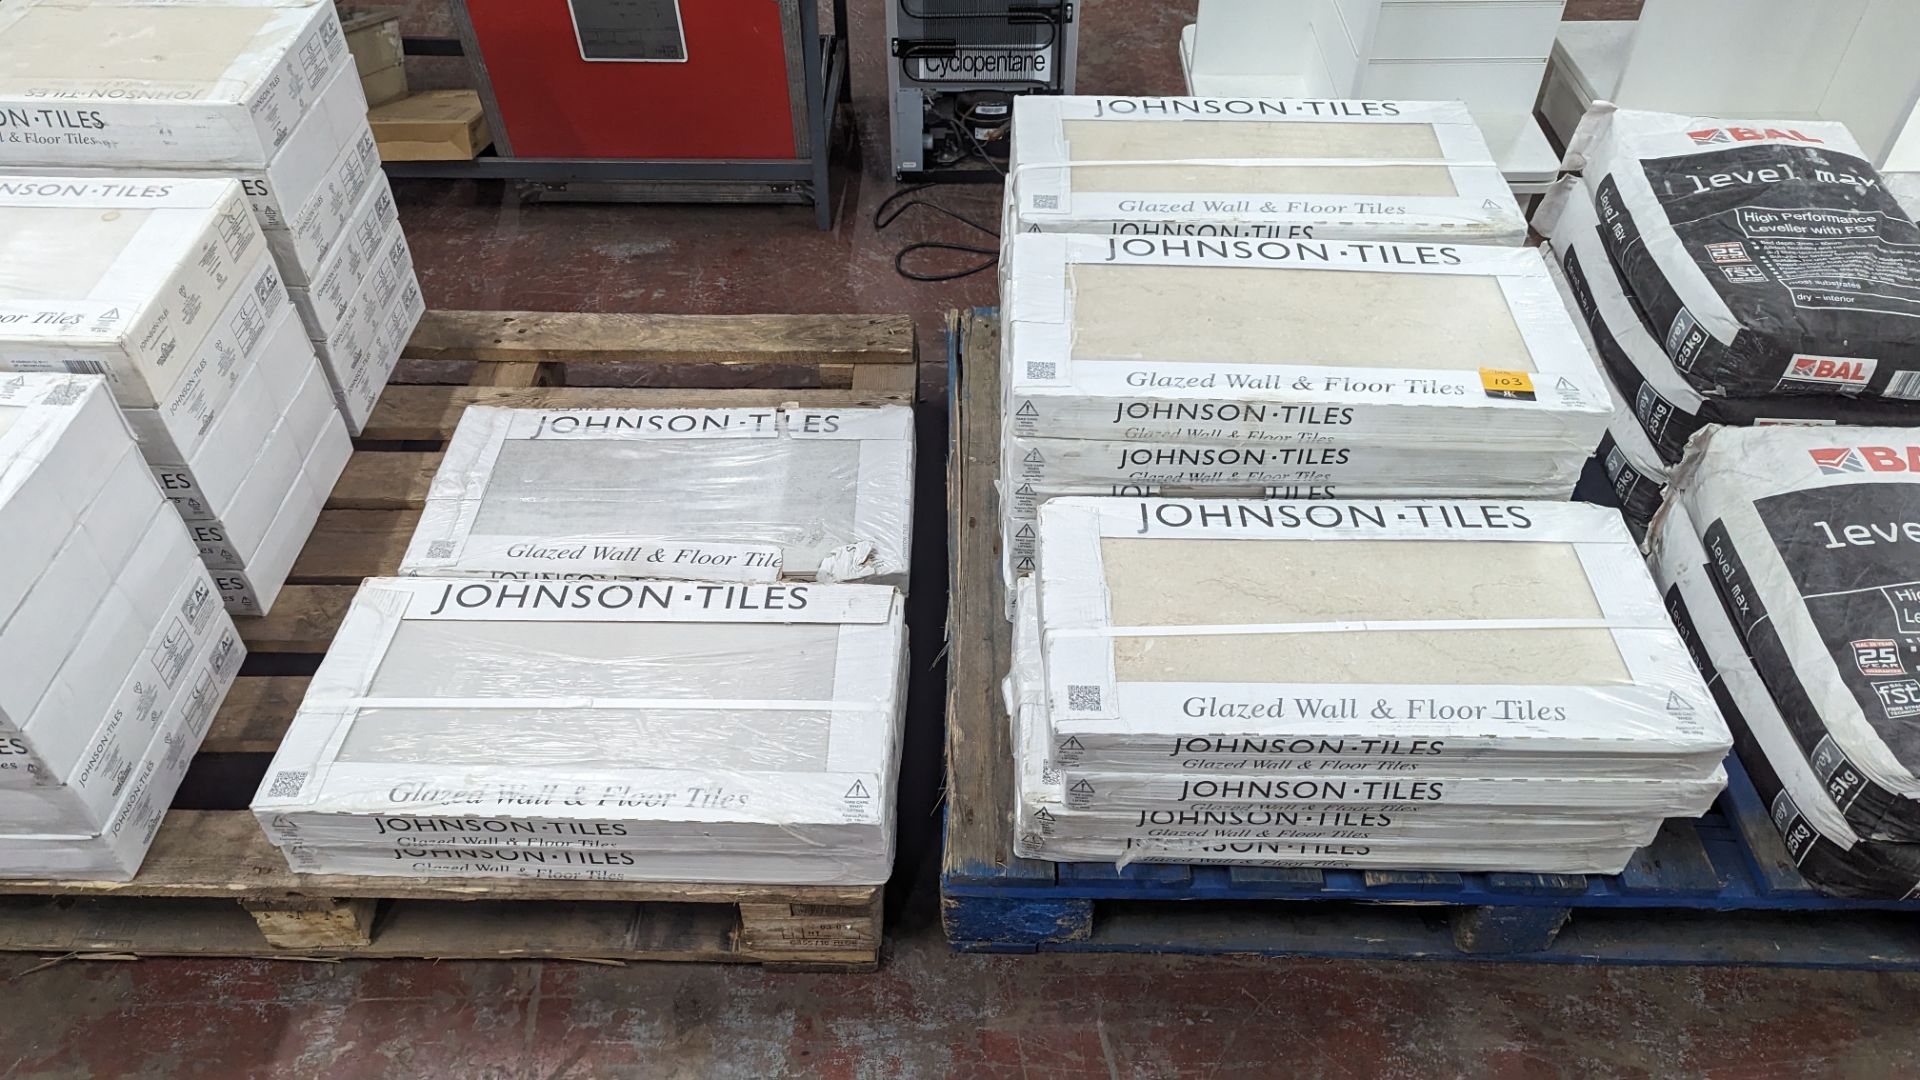 16 packs of Johnson glazed wall and floor tiles each pack contains 5 tiles. Each tile measures 597m - Image 2 of 10